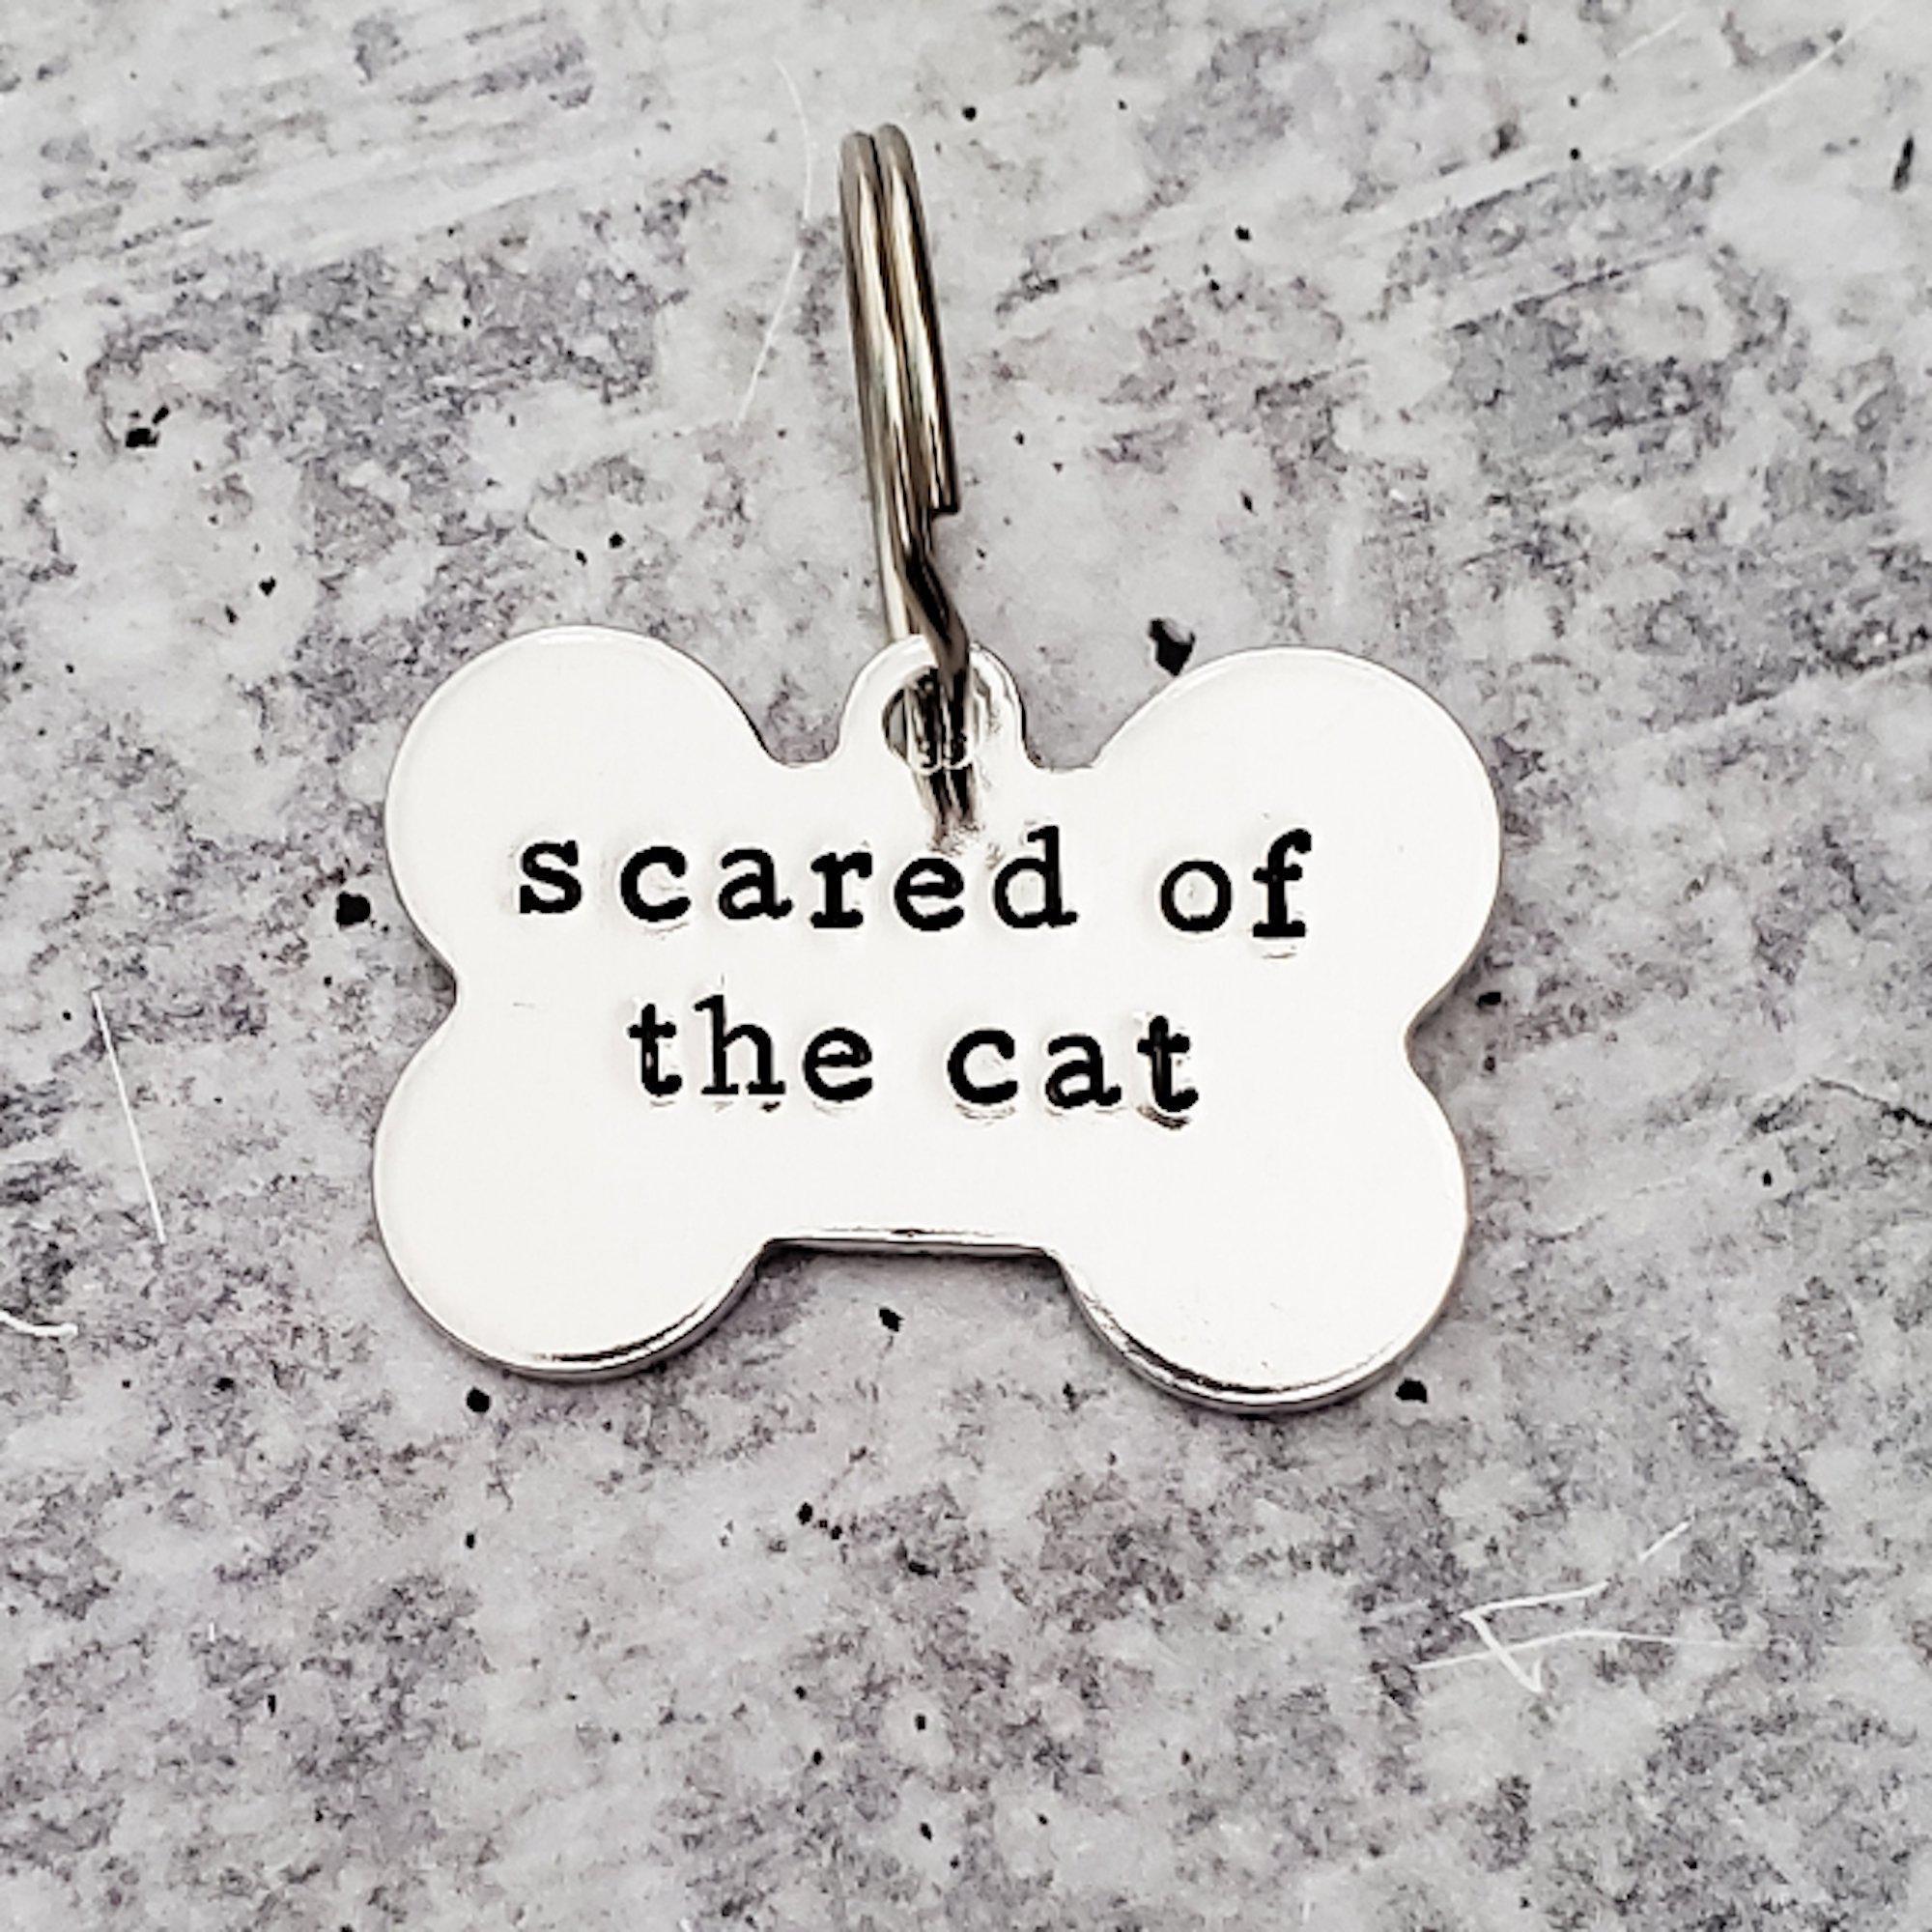 SCARED OF THE CAT Bone-Shaped Pet Tag Salt and Sparkle